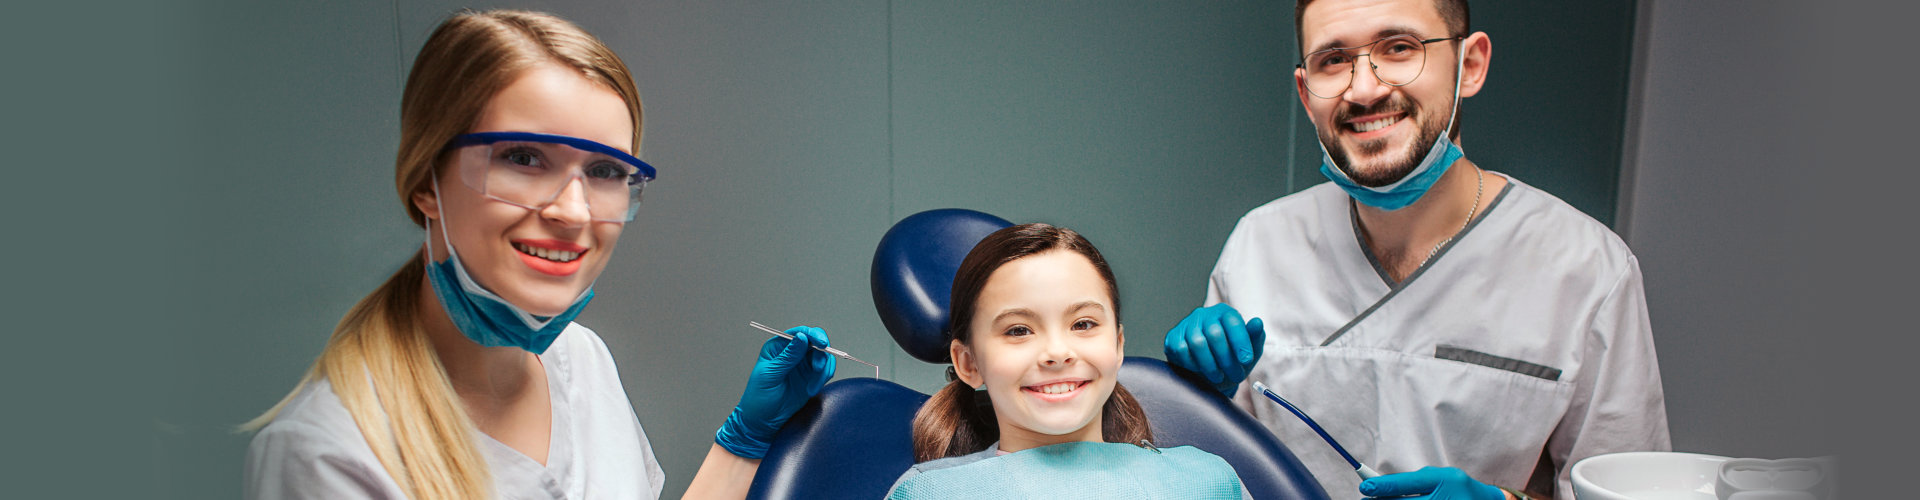 cheerful girl with two dentist